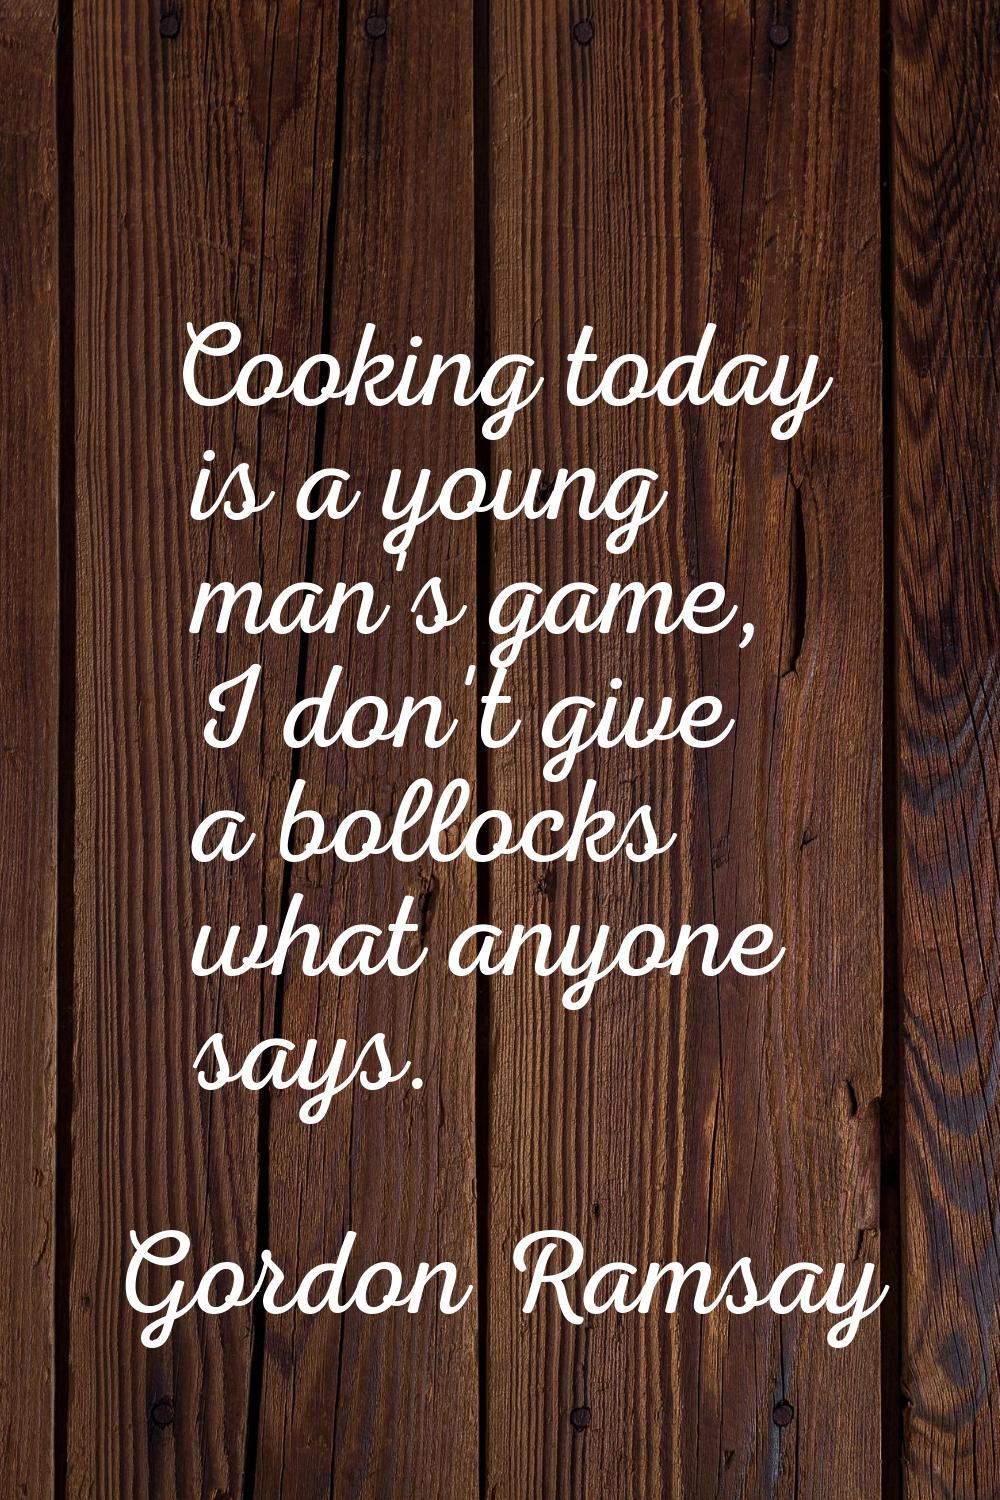 Cooking today is a young man's game, I don't give a bollocks what anyone says.